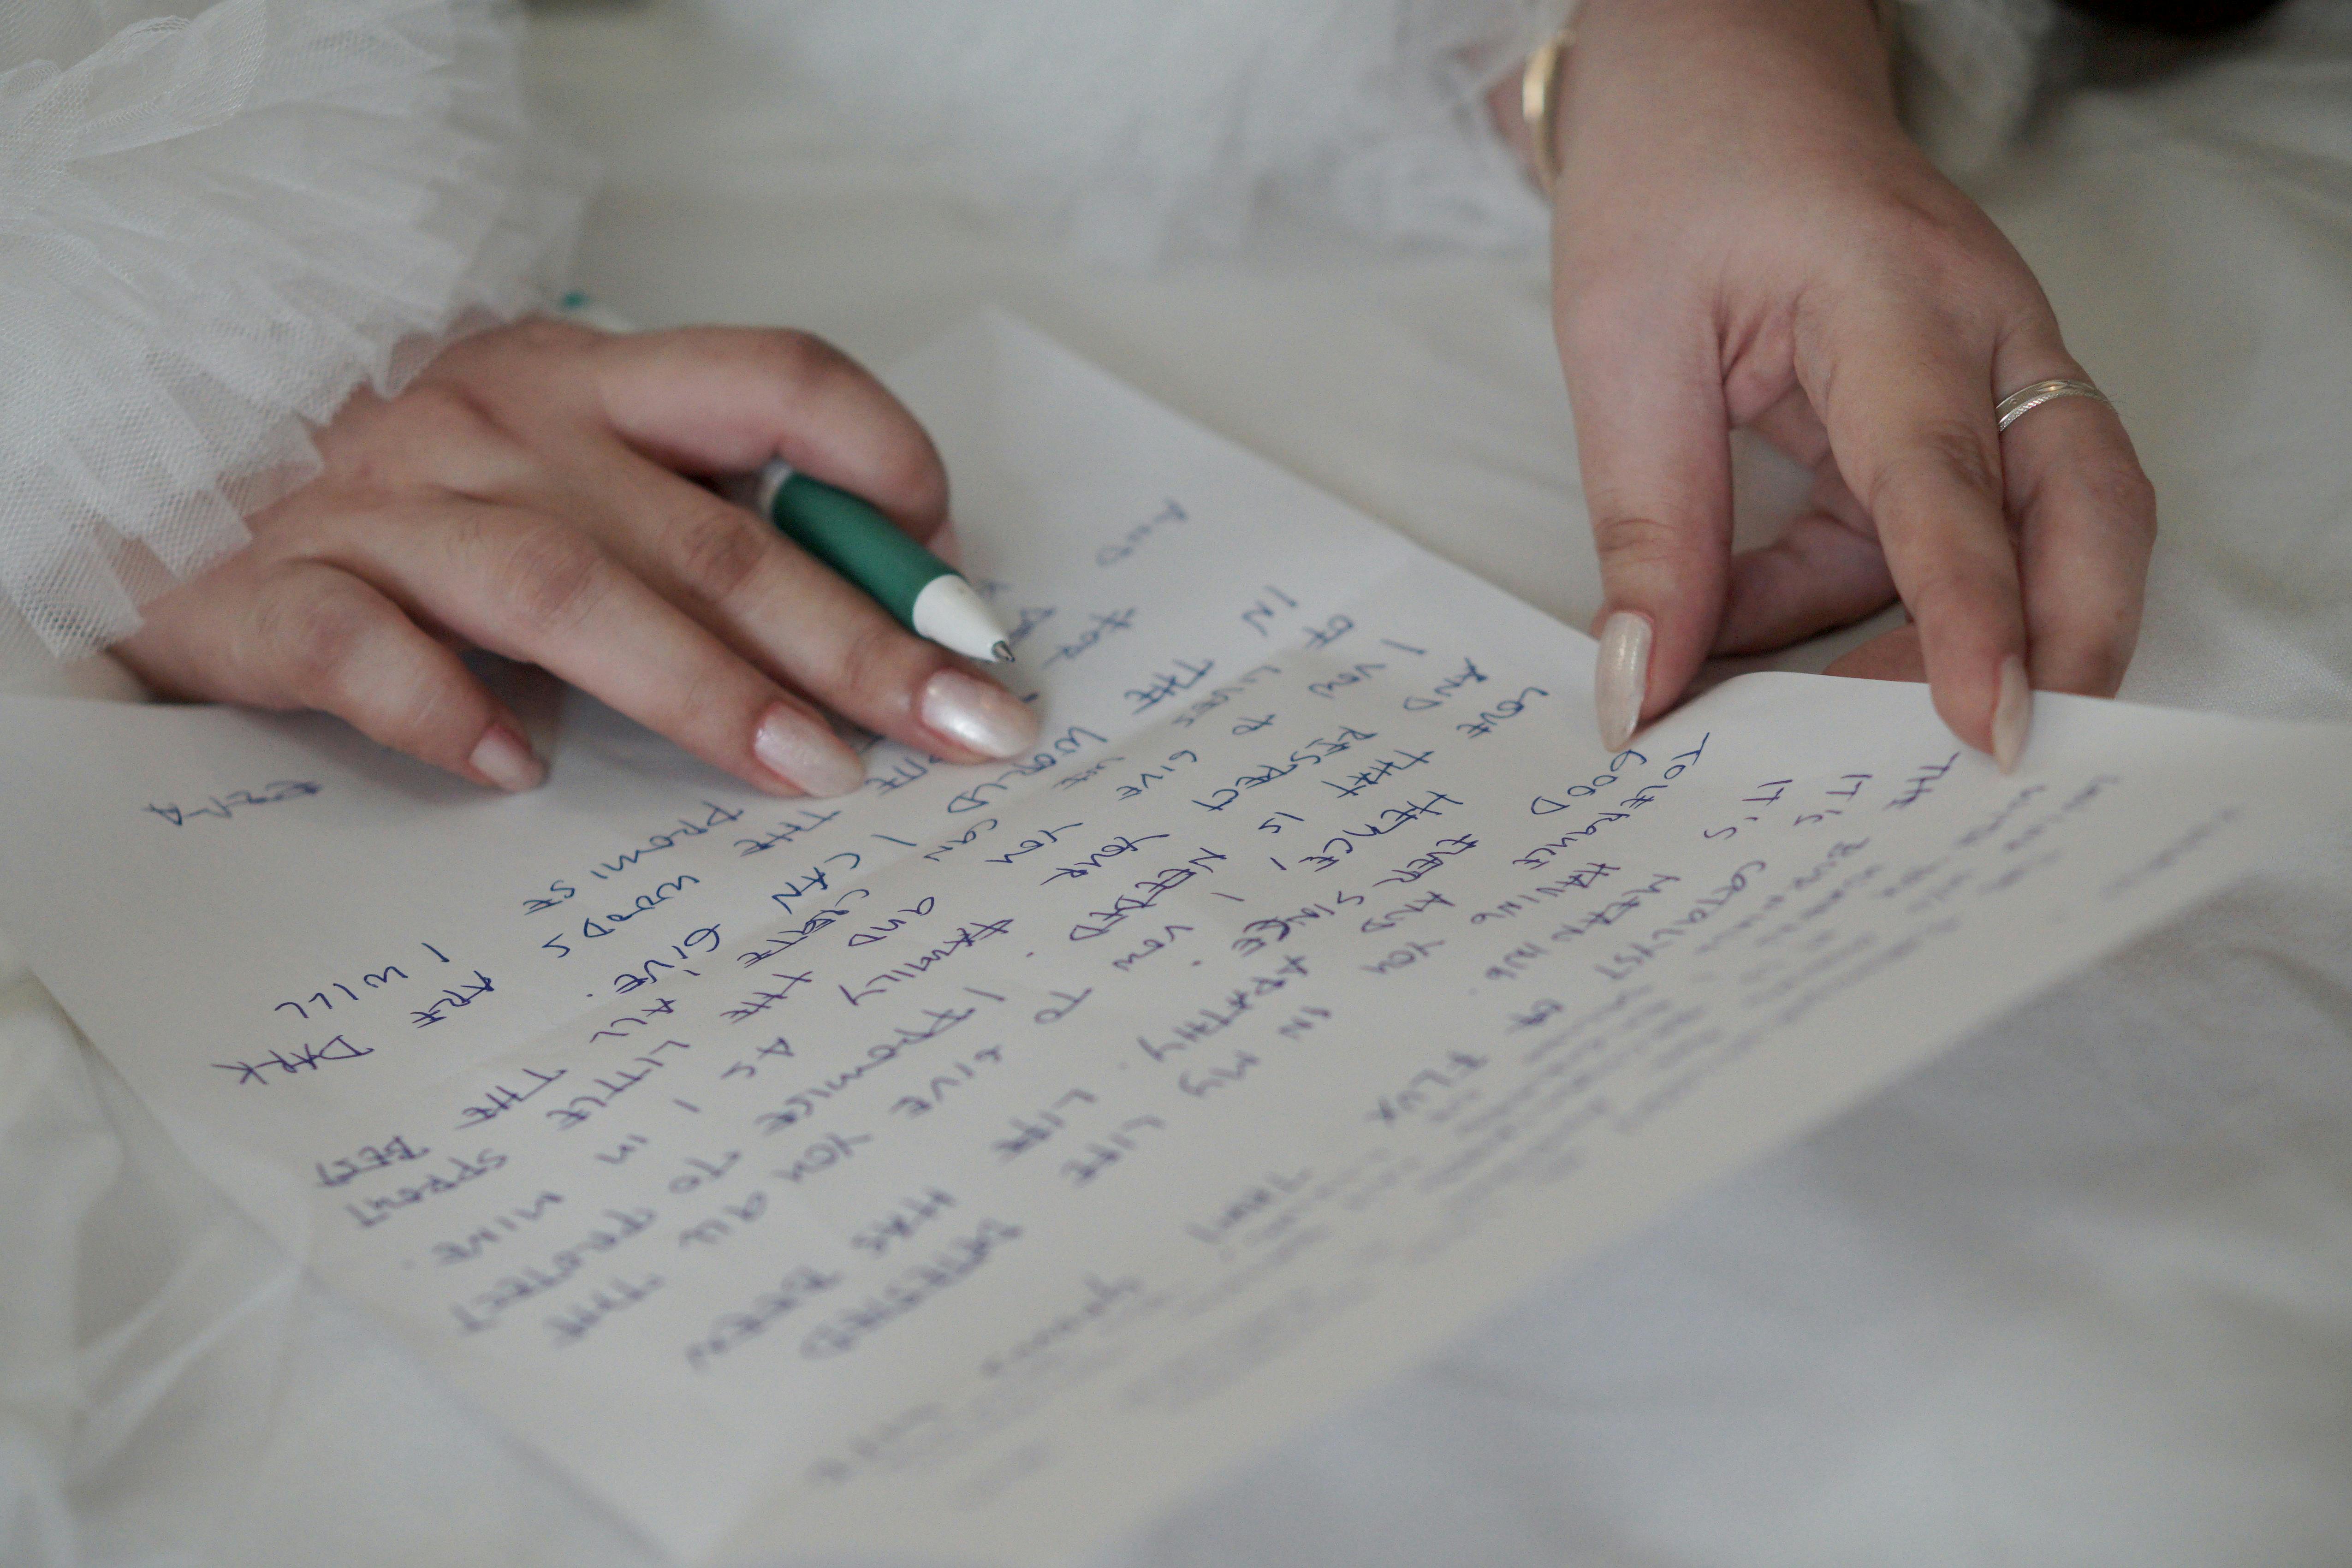 A woman's hands holding a pen while writing a letter | Source: Pexels